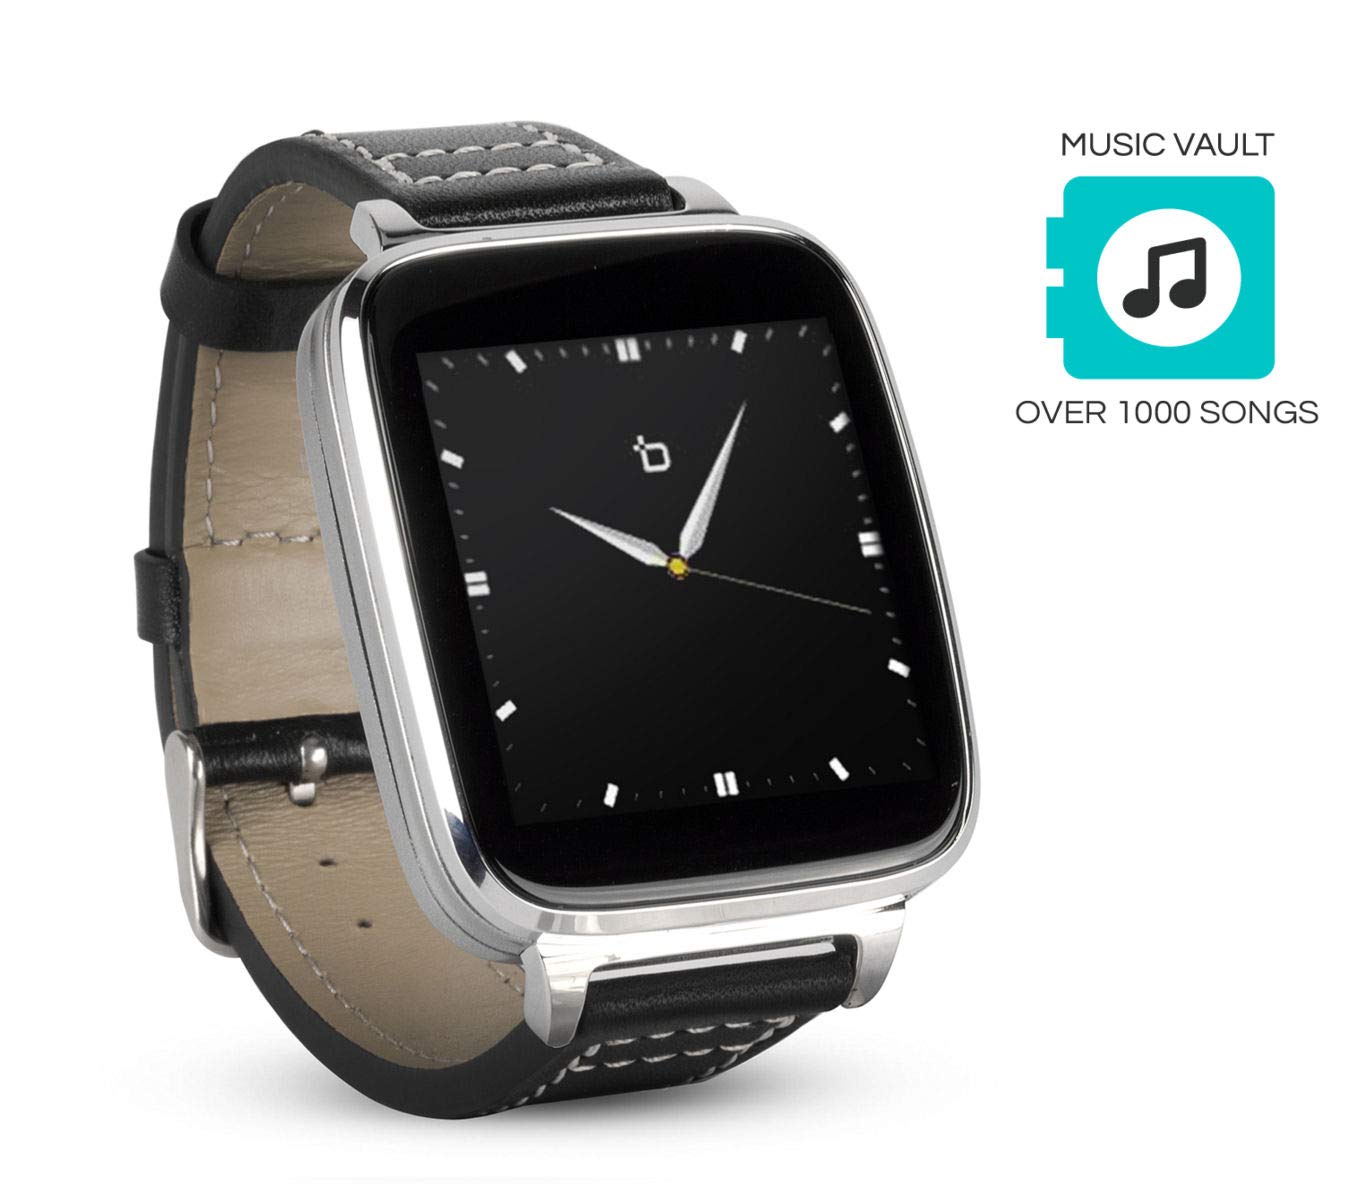 Beantech Silver Engage Plus Smartwatch for iOS and Android with 8GB of Music Storage and Leather Strap, Light Silver